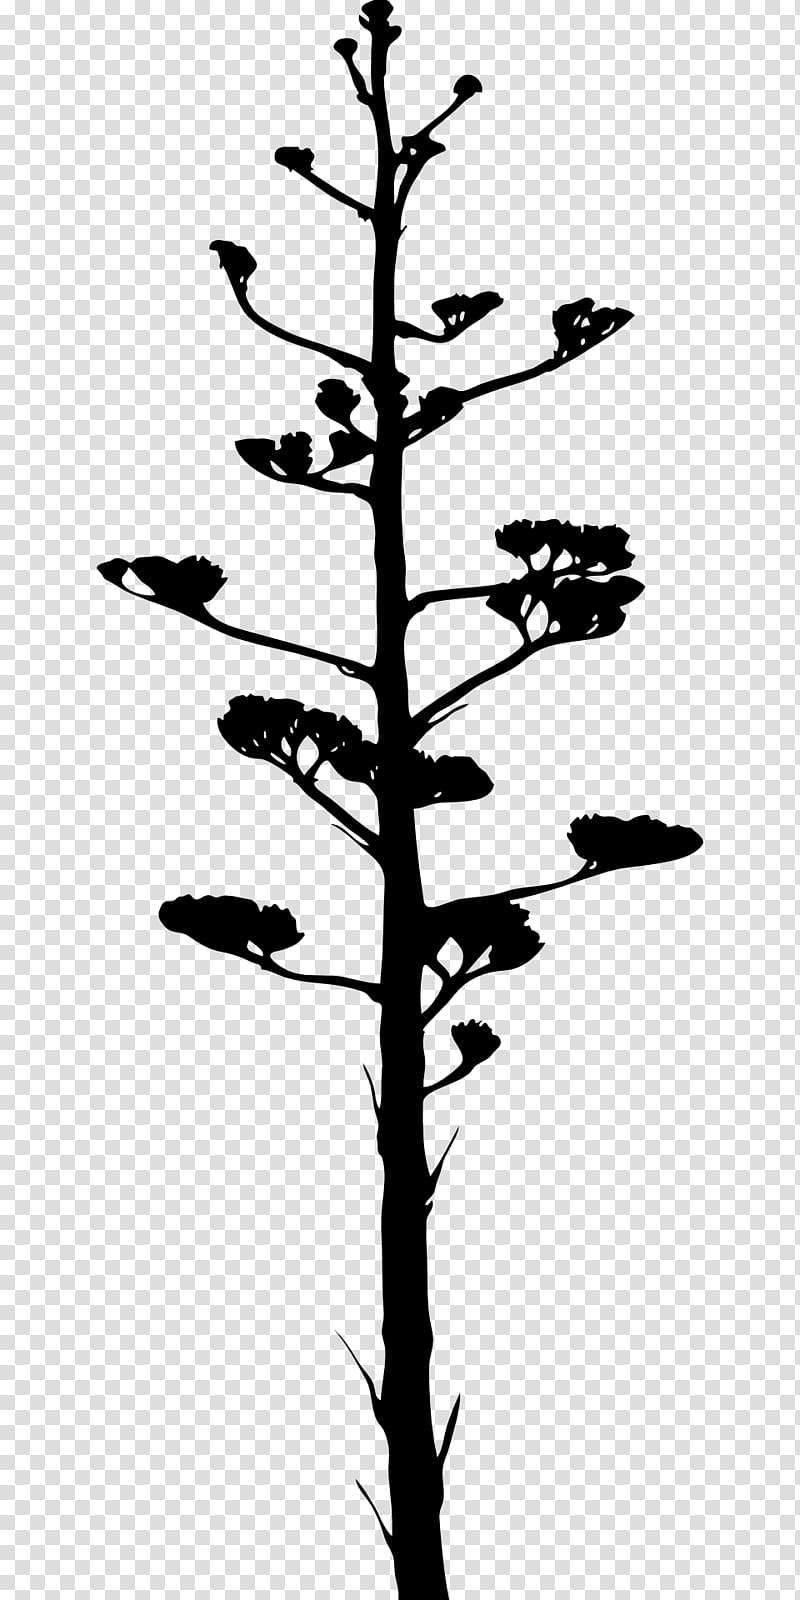 Agave azul, branches silouhette transparent background PNG clipart